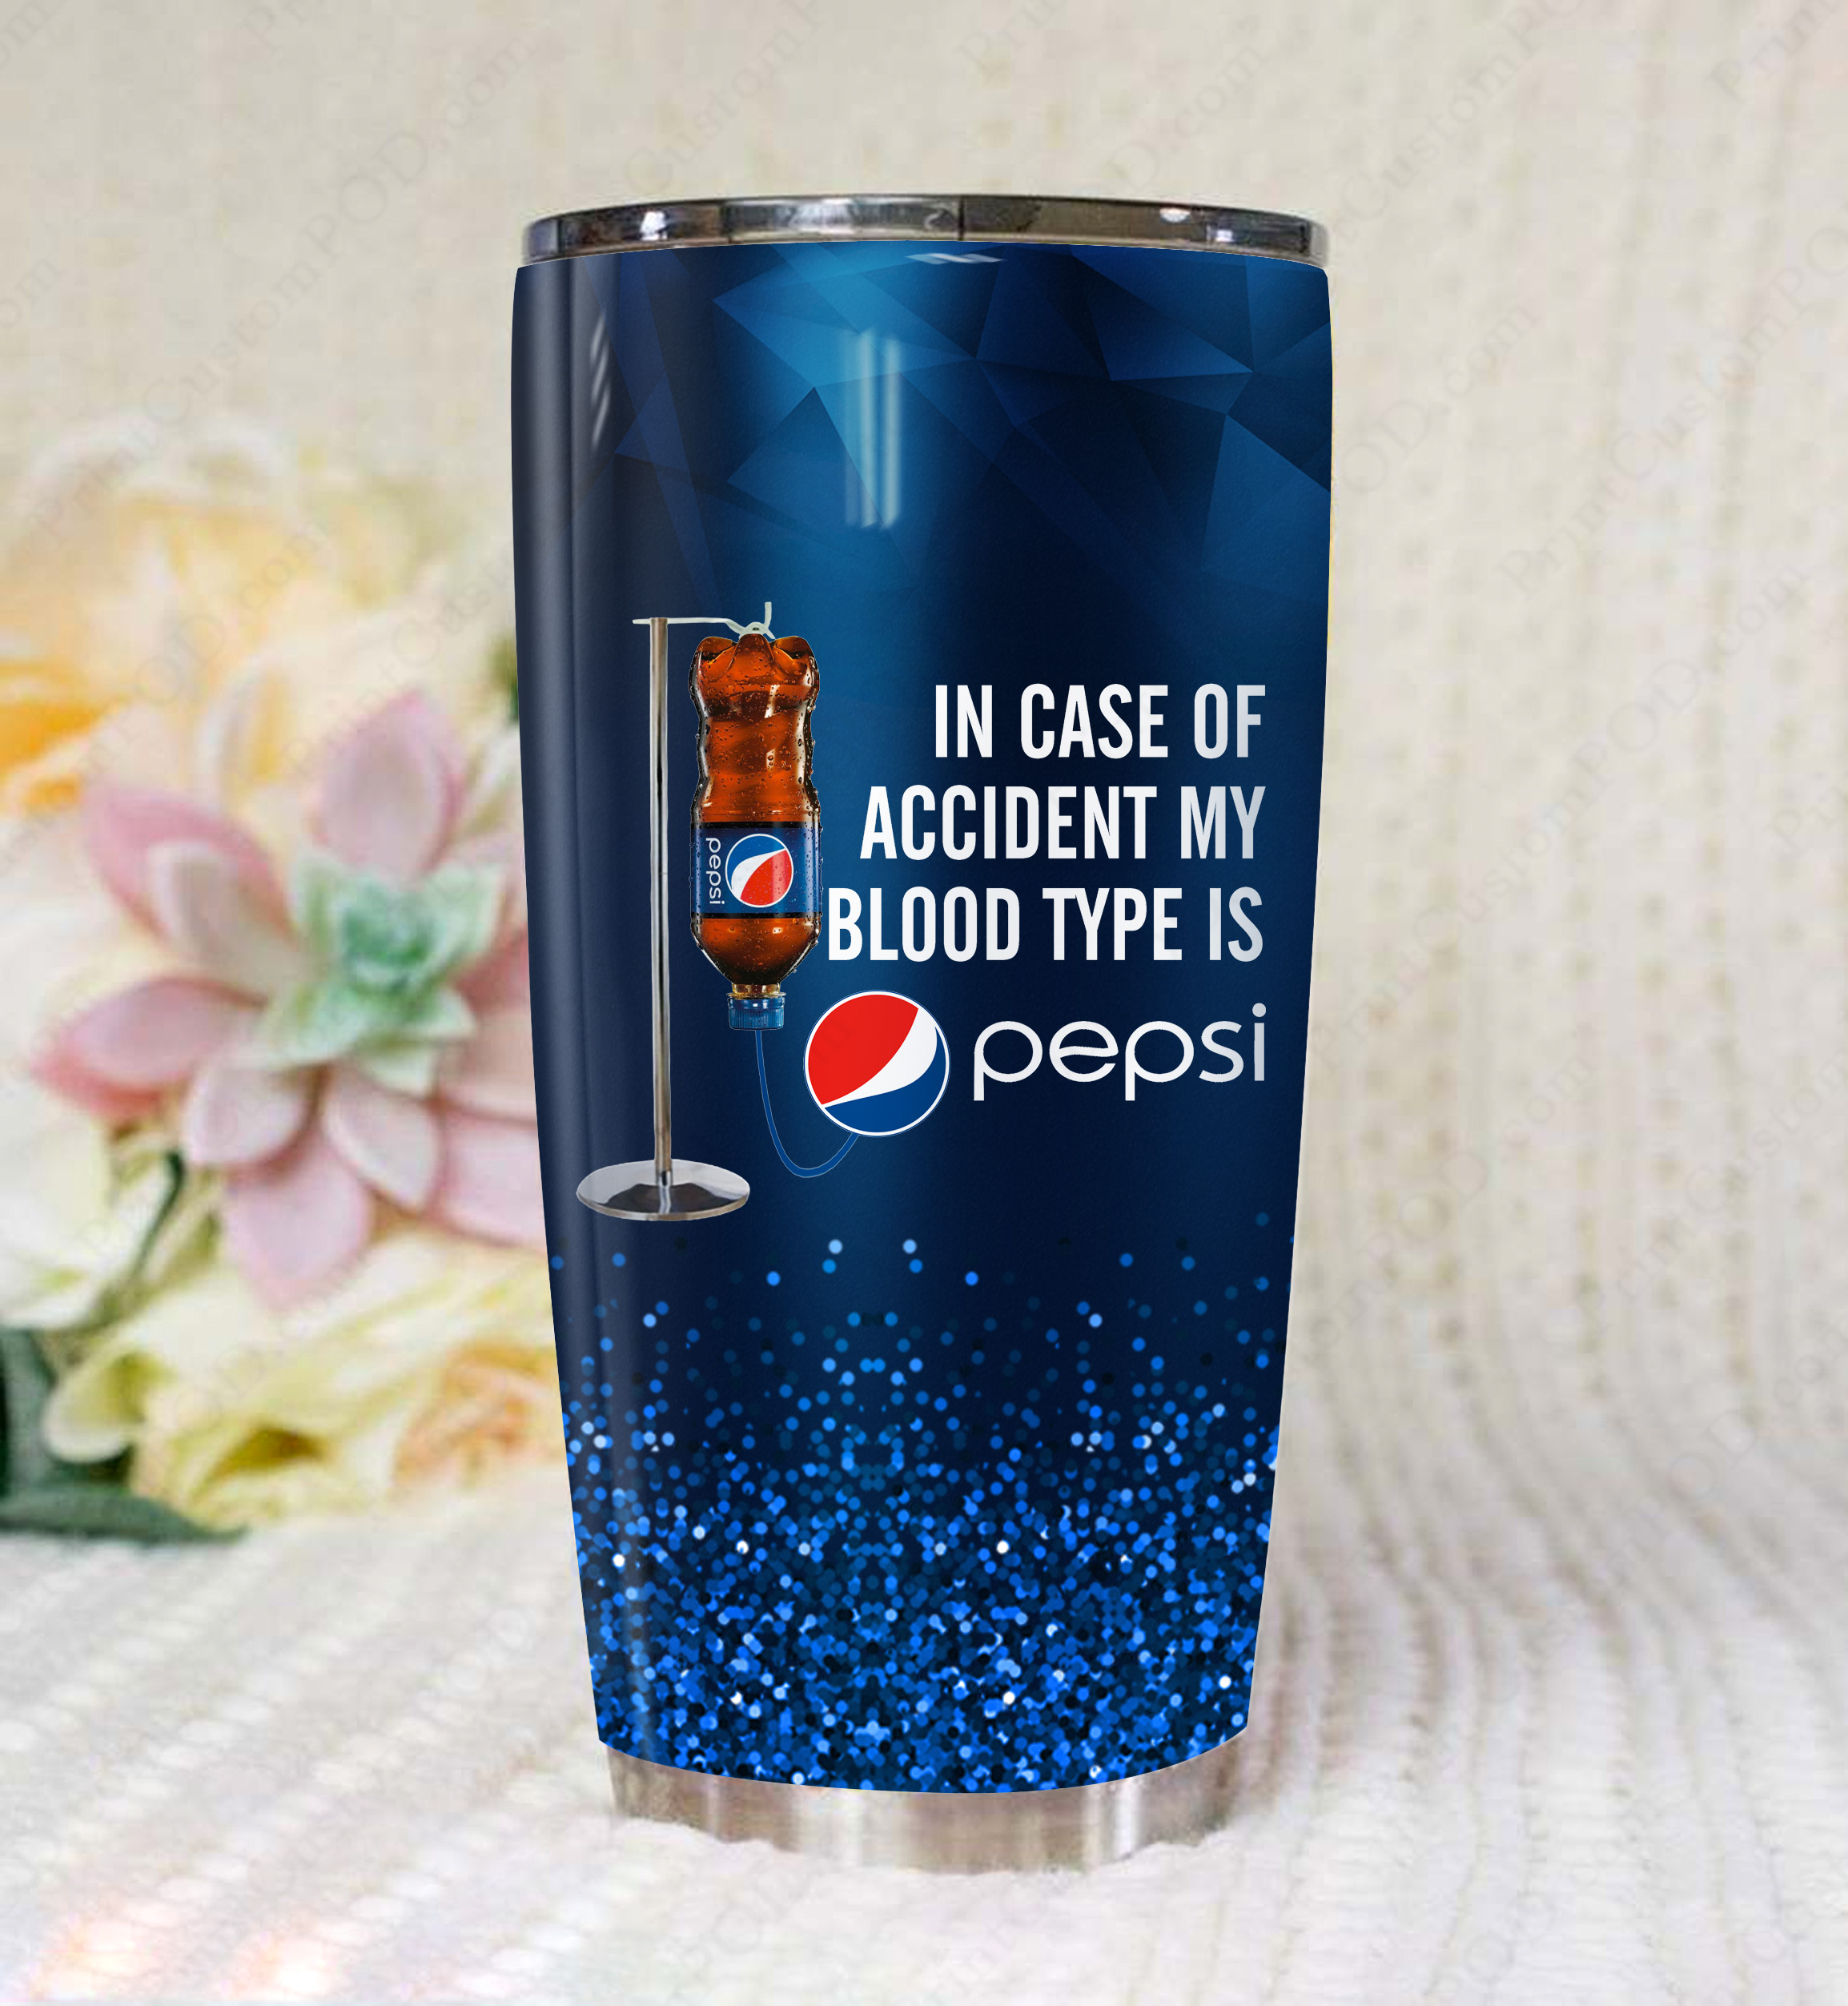 In case of an accident my blood type is pepsi full printing tumbler 2